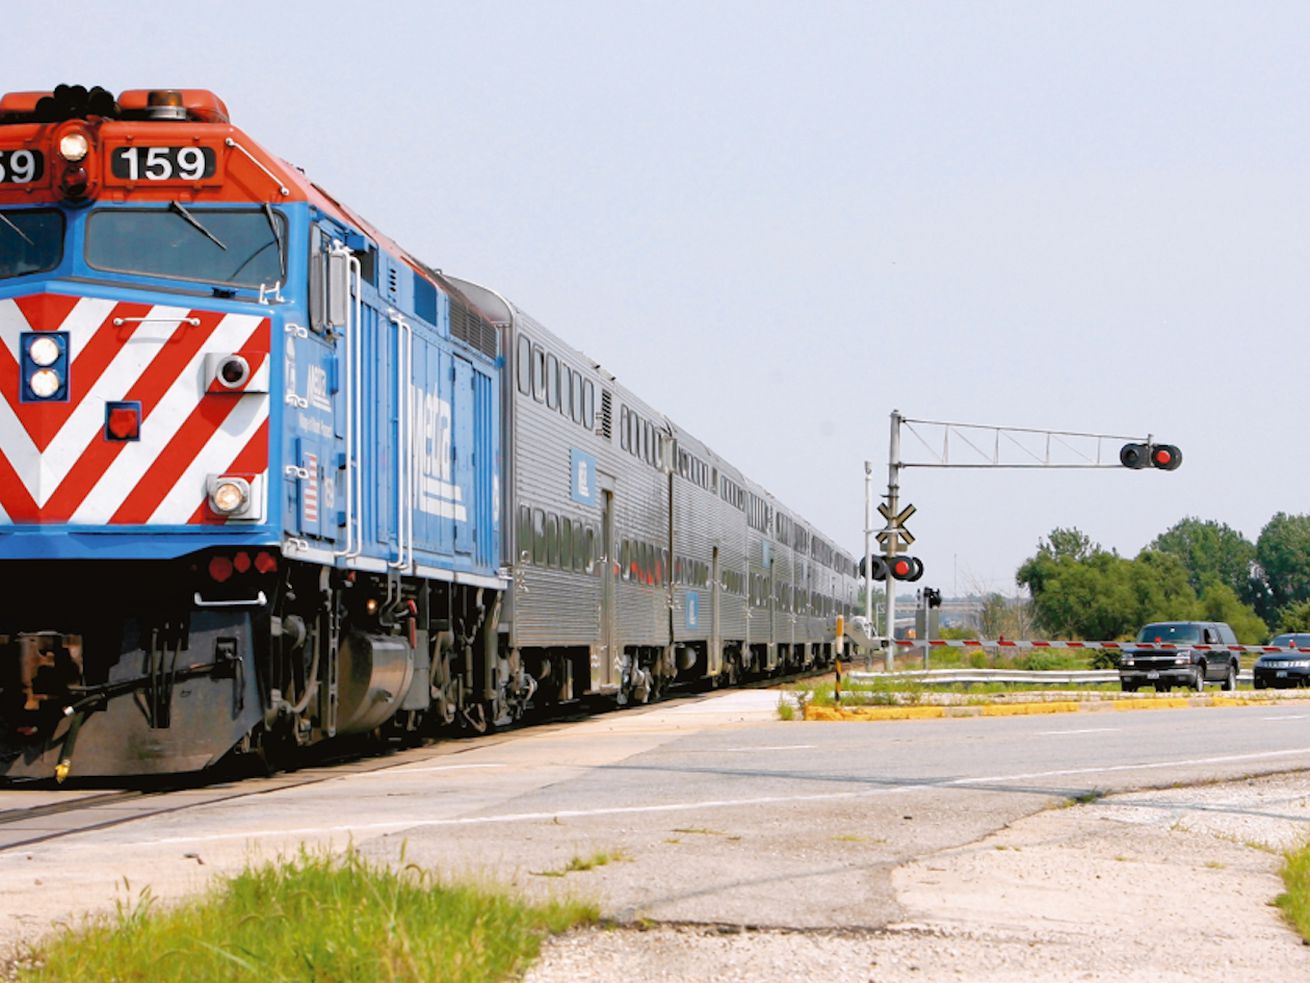 A suspicious package was reported on a Metra train at the Barrington Station.